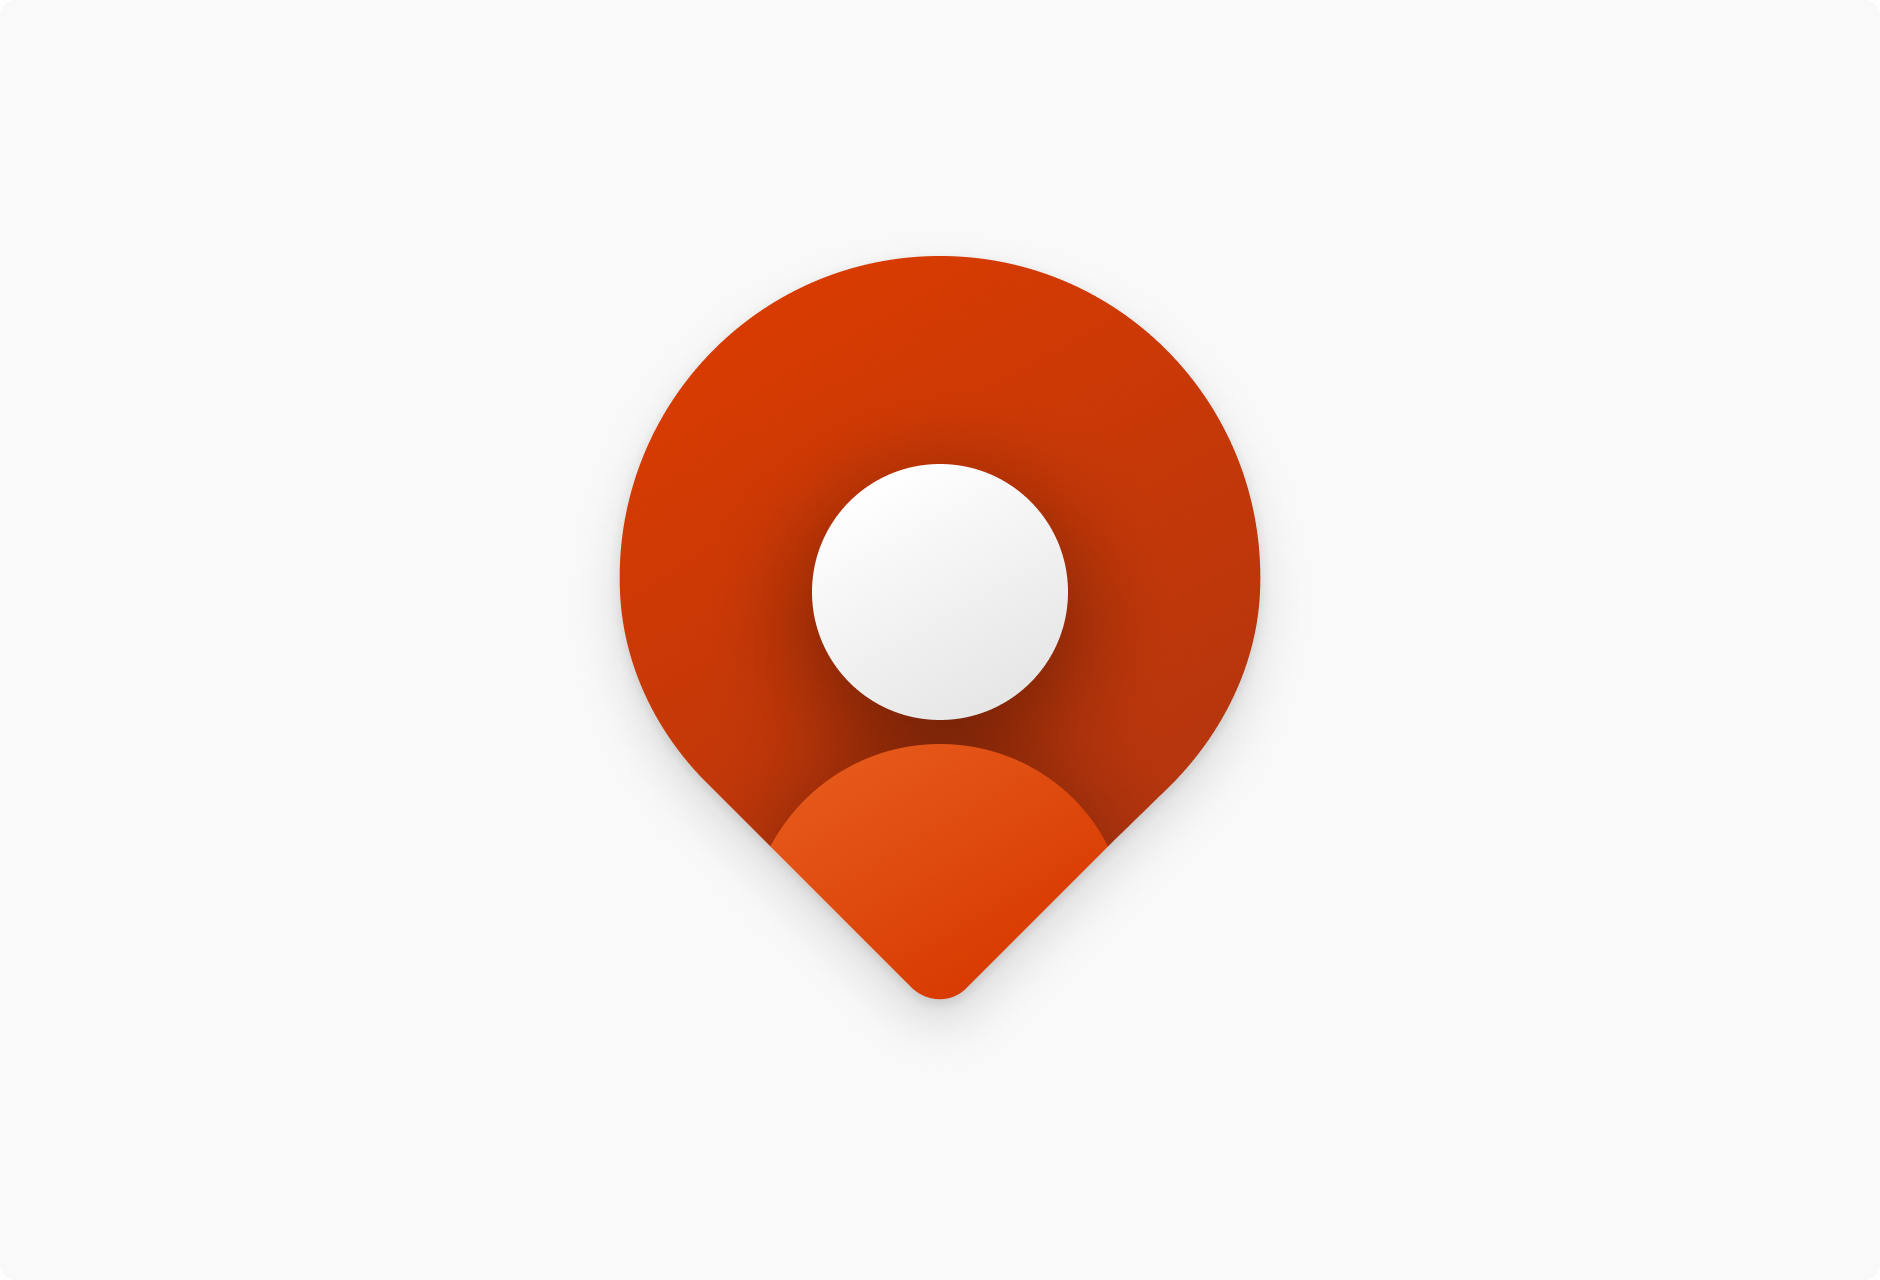 An abstract application icon for a hypothetical maps app.